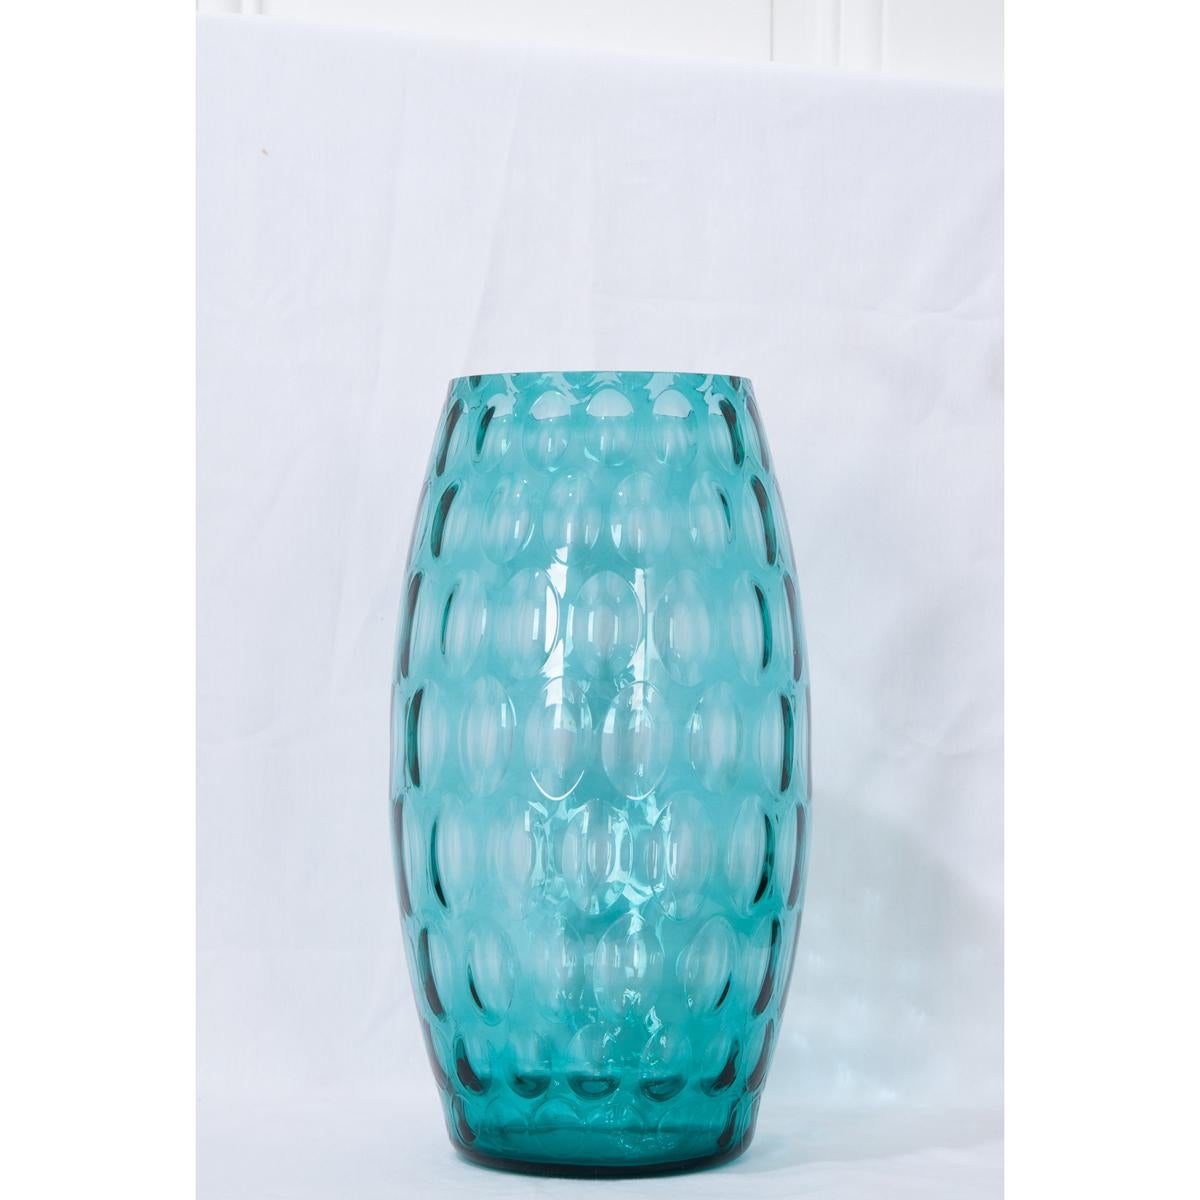 Lovely, aqua-blue glass vase, circa 1960. The oval concave shapes imposed on its interior provide a light texture to the vase’s exterior and compliments the convex shape of the vase.